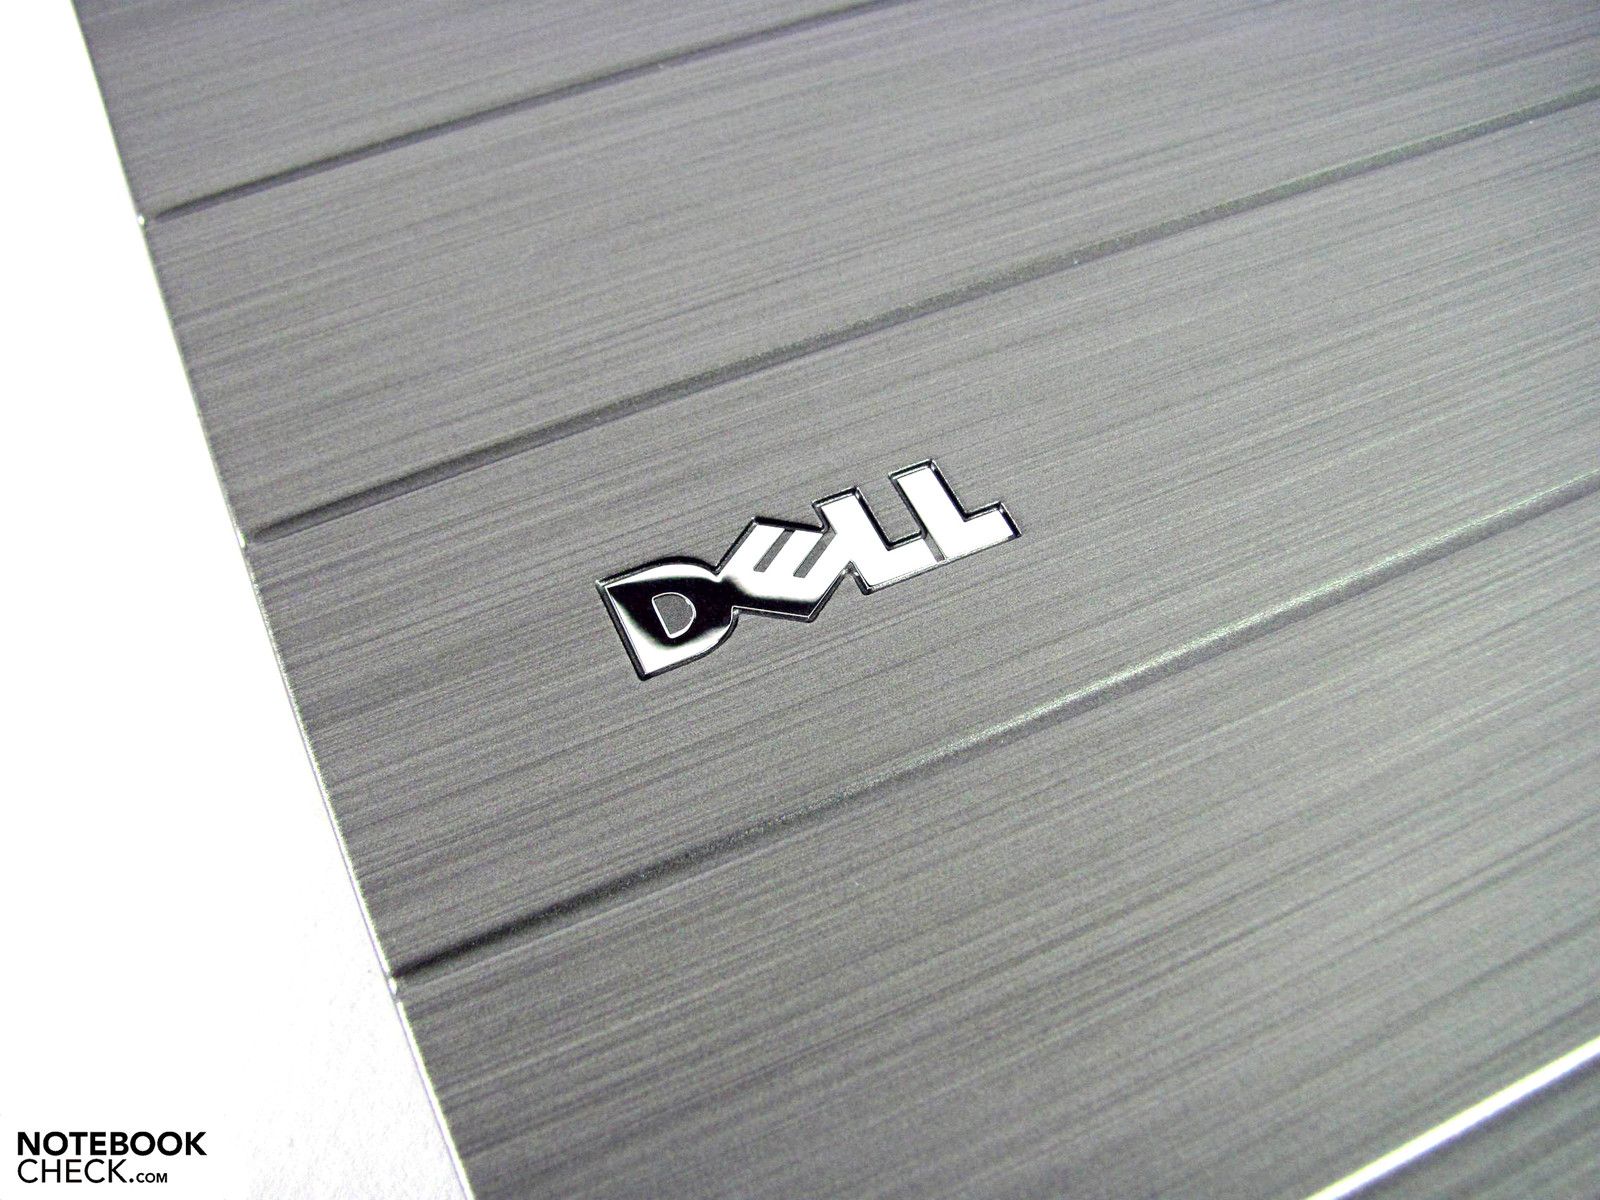 Review Dell Precision M4500 (i7-940XM) Notebook - NotebookCheck ...